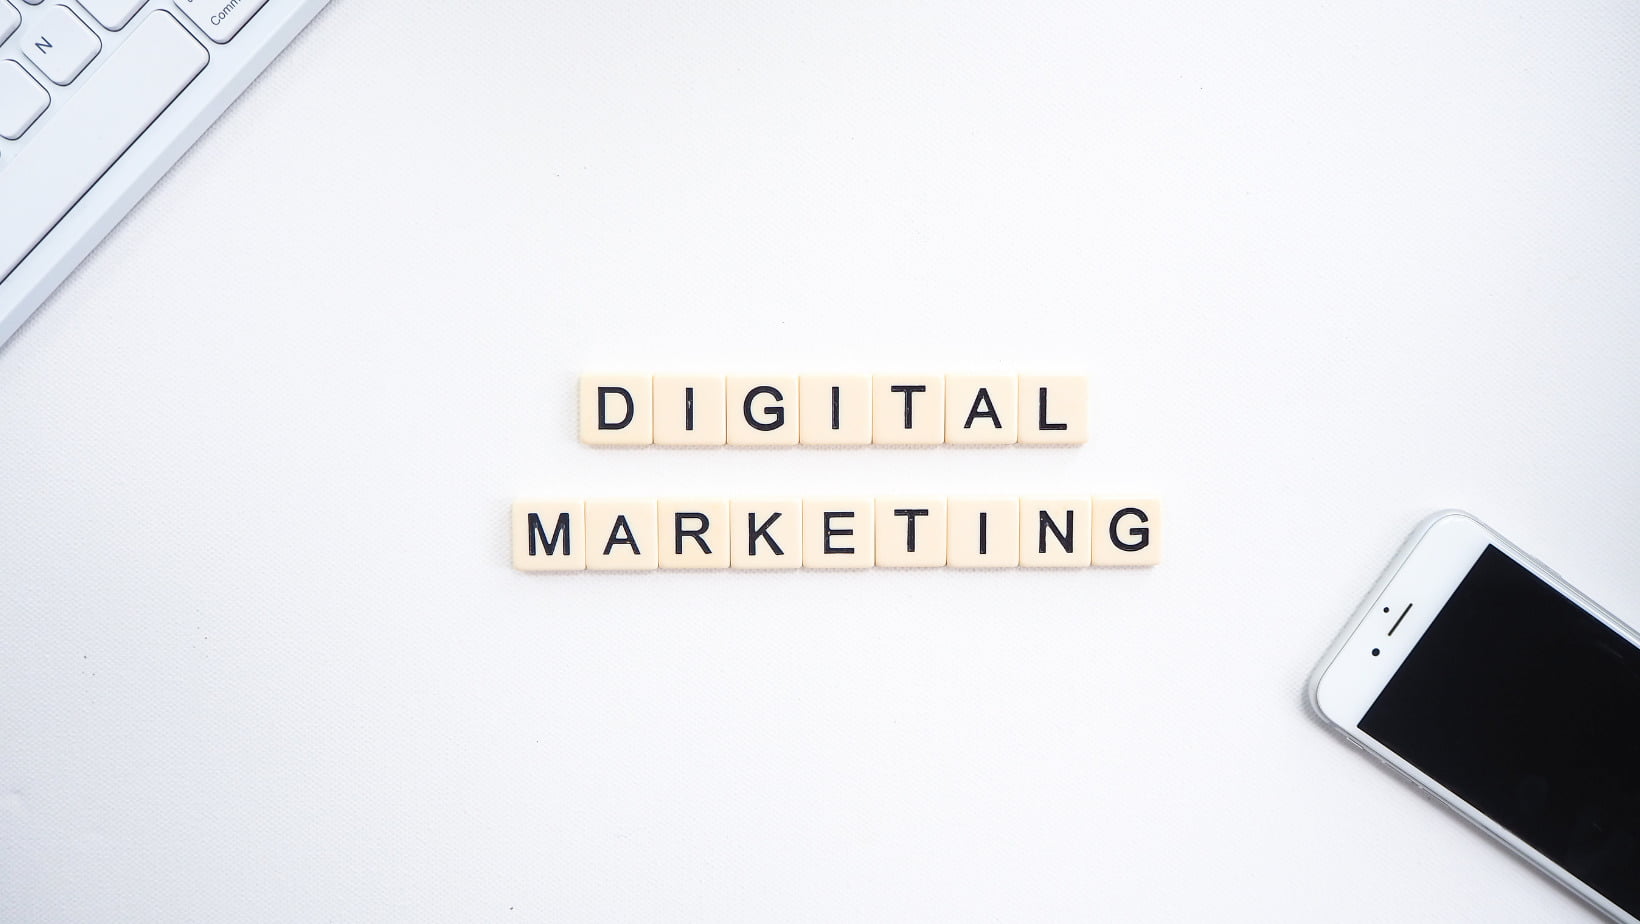 Are you utilising the best digital marketing tools to reach your target audience?